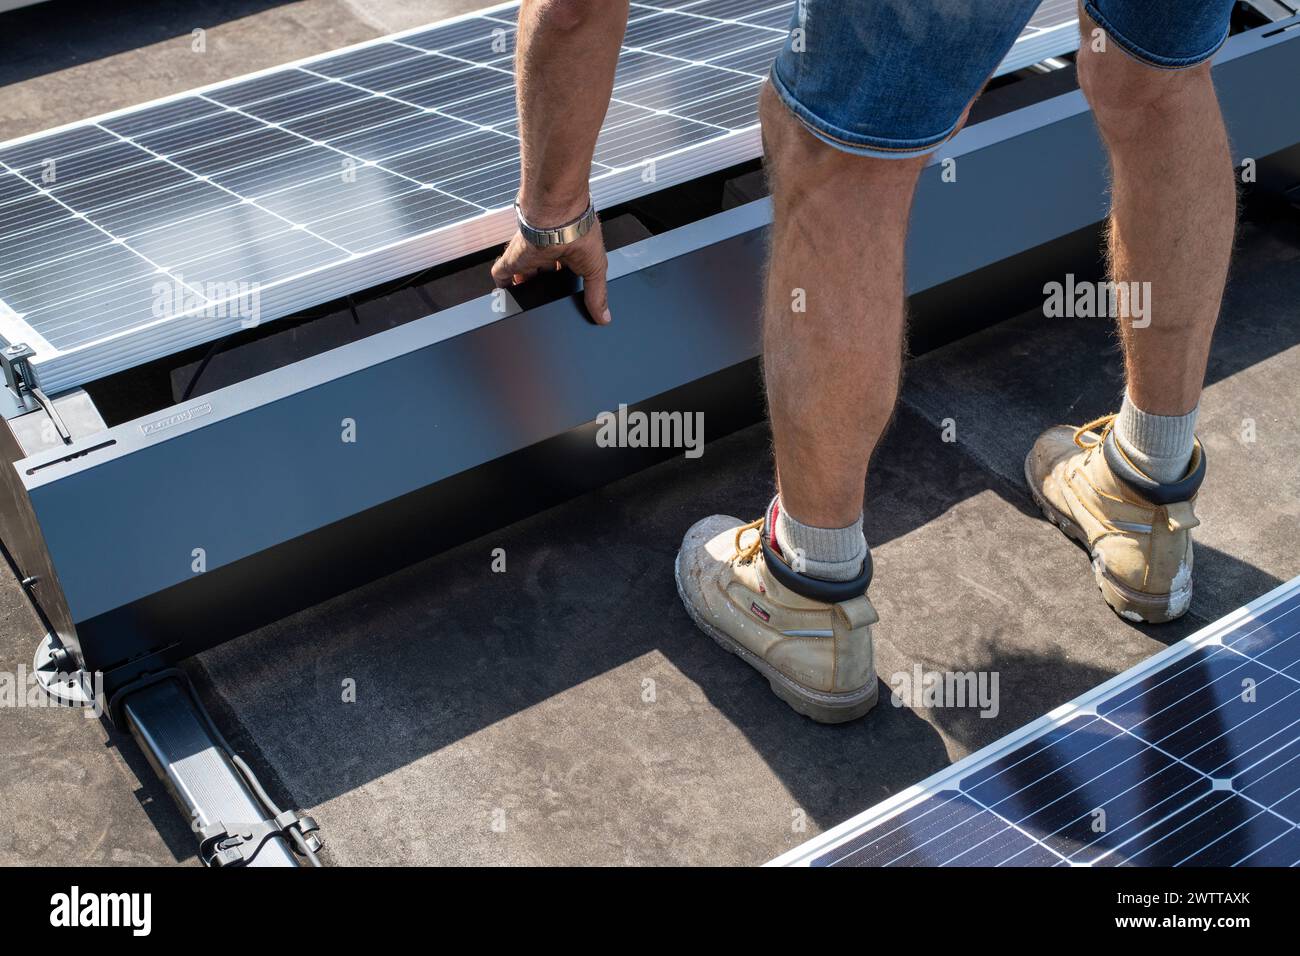 Worker installing solar panels on a sunny day Stock Photo